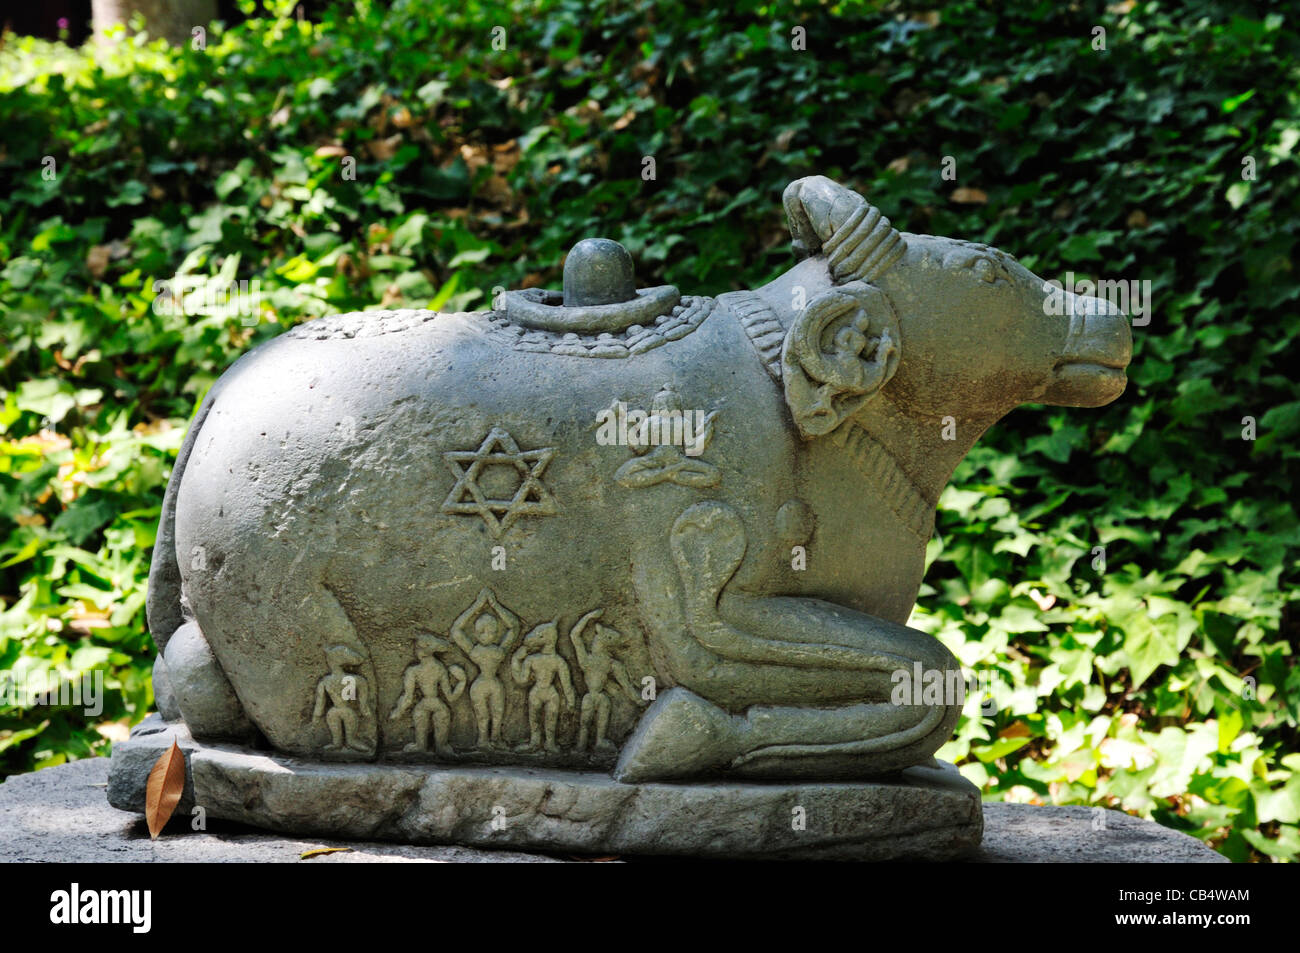 Carved bull with Shiva lingam (symbol of Shiva) and other images including star of David at the Norton Simon museum in Pasadena Stock Photo